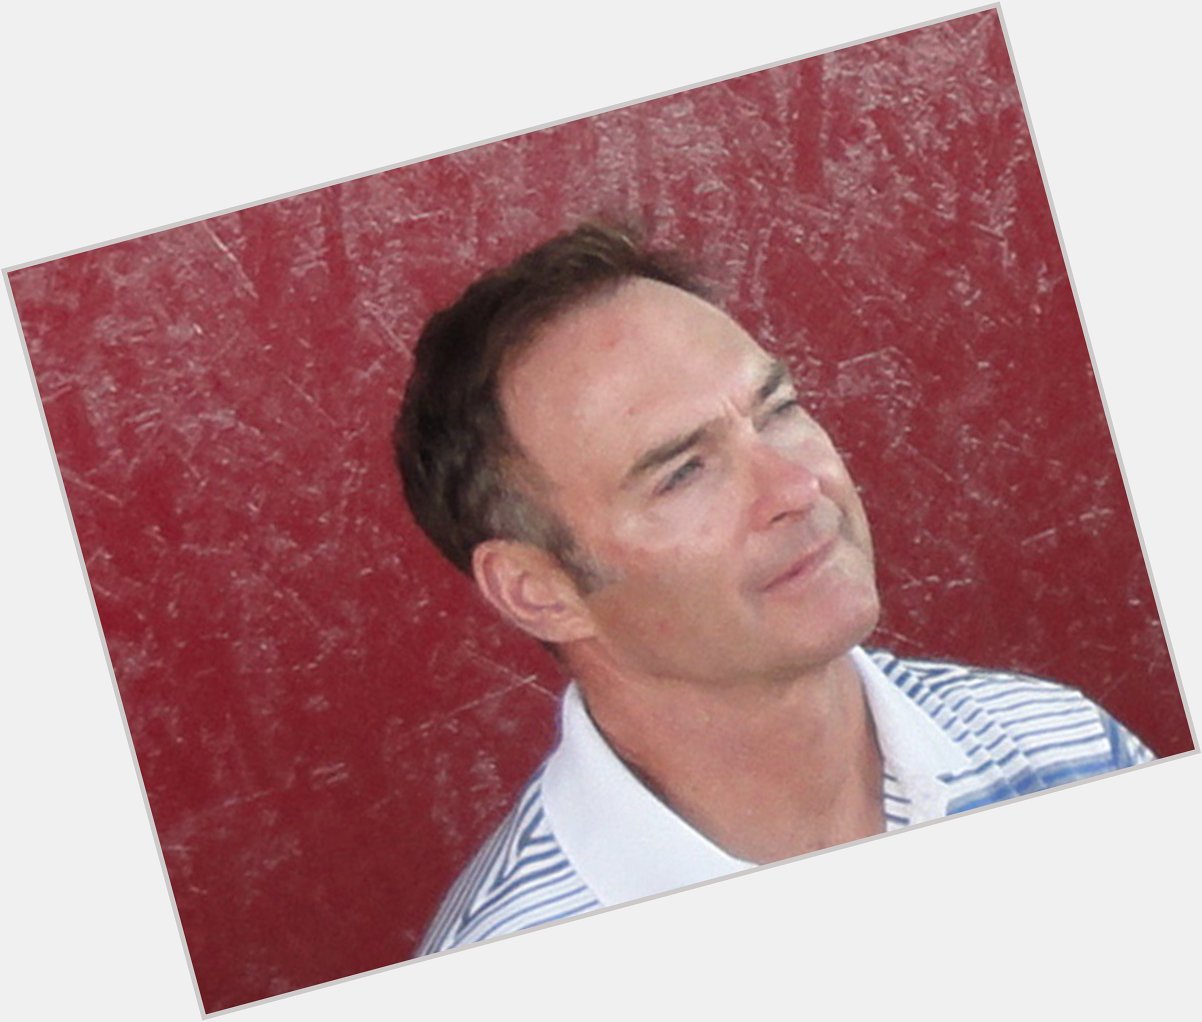  In 2011 I met & actually talked with this man Happy Birthday to Paul Molitor my childhood crush   